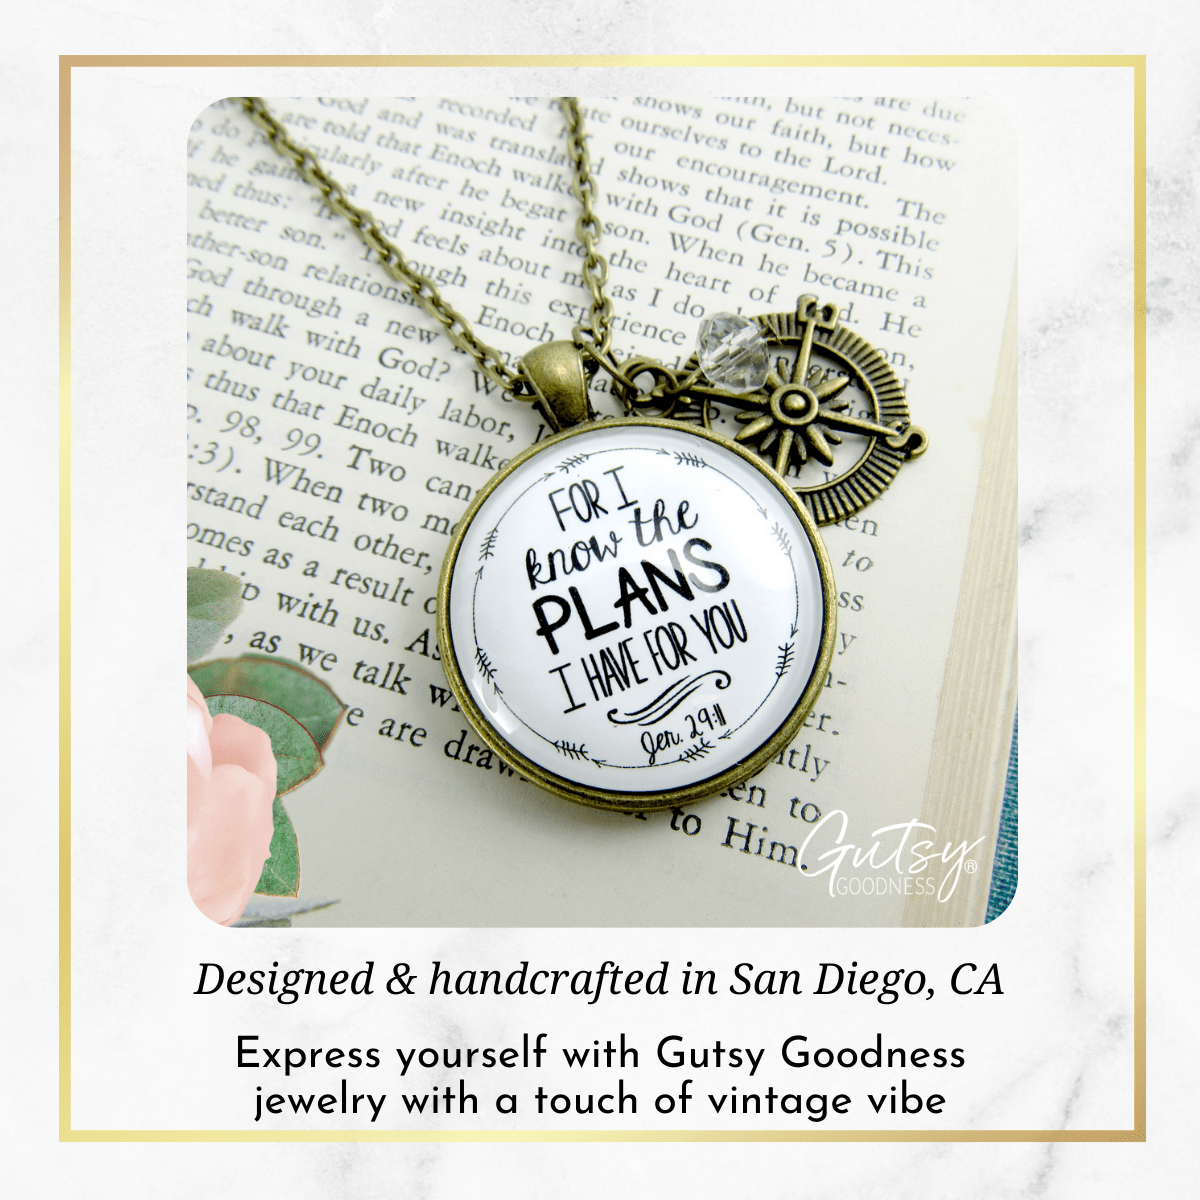 Gutsy Goodness Faith Compass Necklace for I Know Plans Jeremiah 29 11 Quote Jewelry - Gutsy Goodness Handmade Jewelry;Faith Compass Necklace For I Know Plans Jeremiah 29 11 Quote Jewelry - Gutsy Goodness Handmade Jewelry Gifts